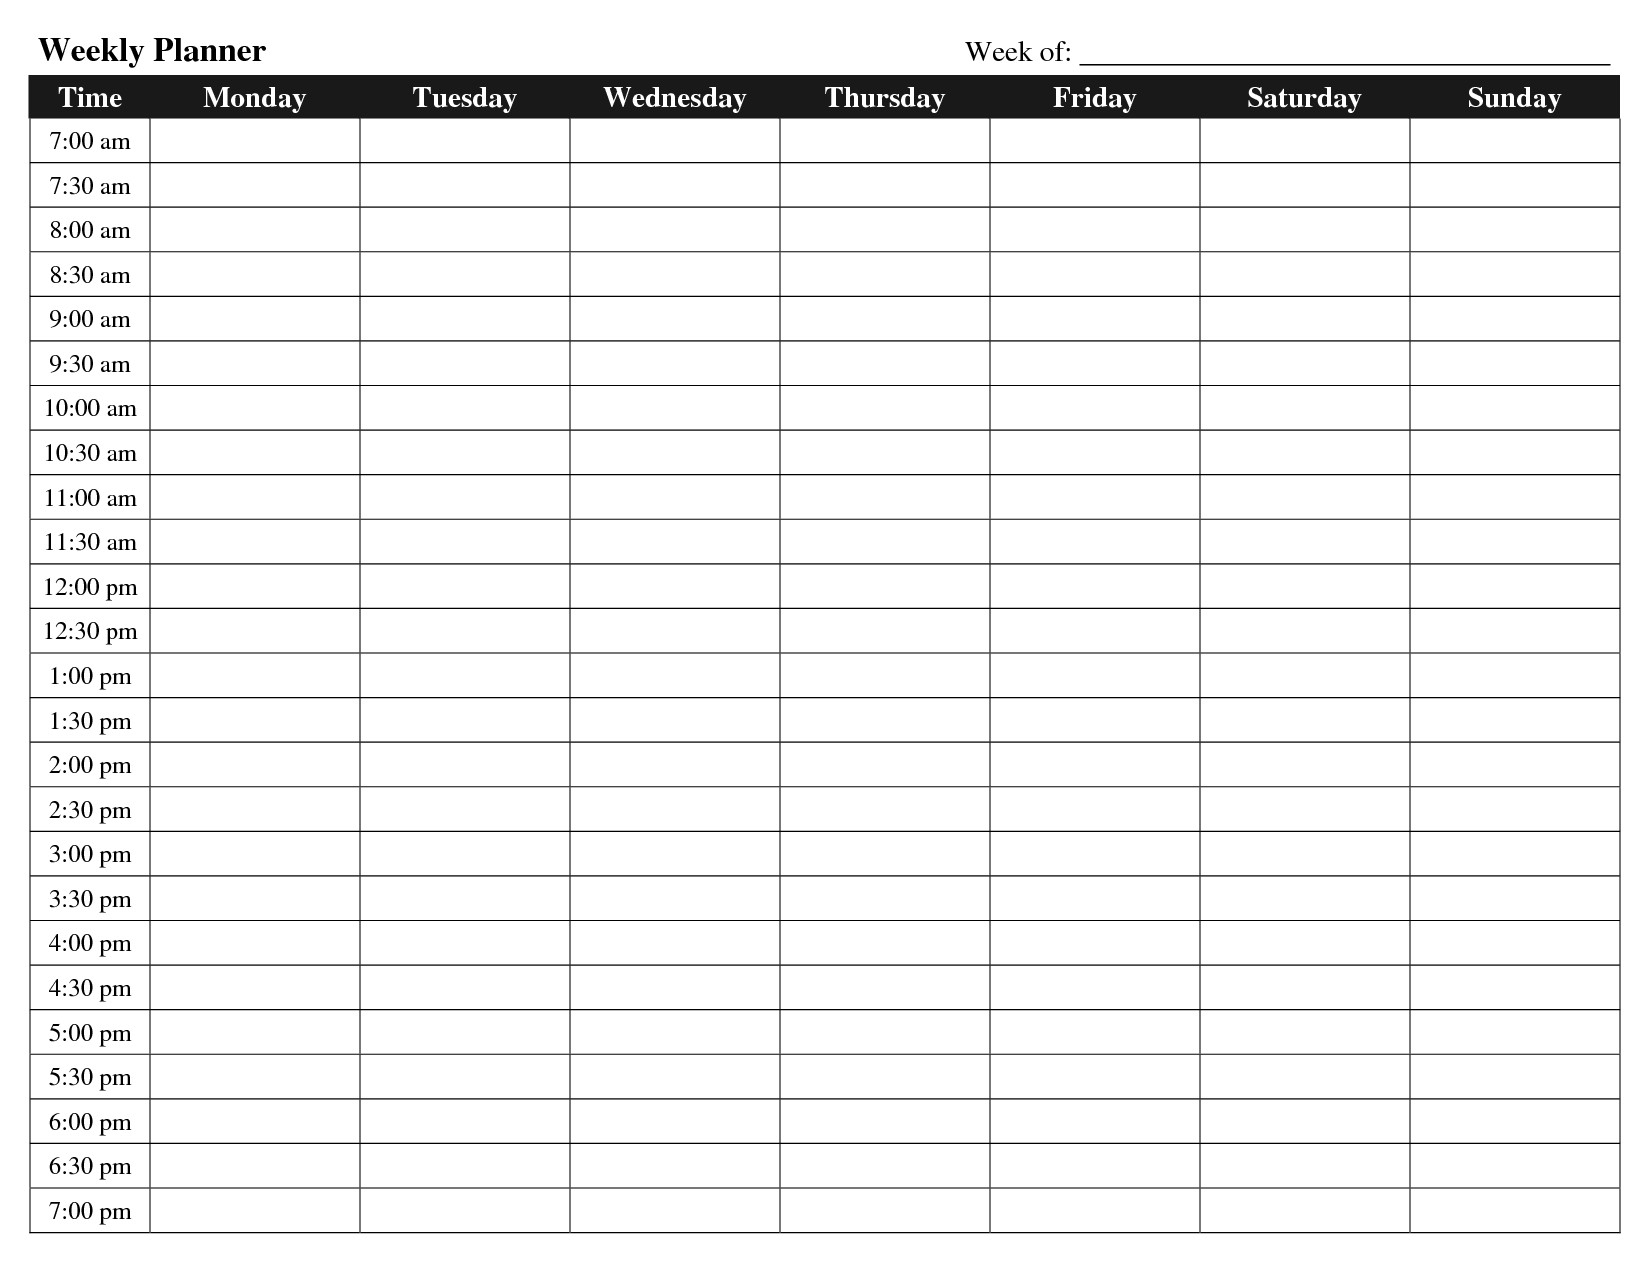 Printable Weekly Planner With Time Slots Download Them Or Print Free intended for Free Printable Weekly Calendar With Time Slots